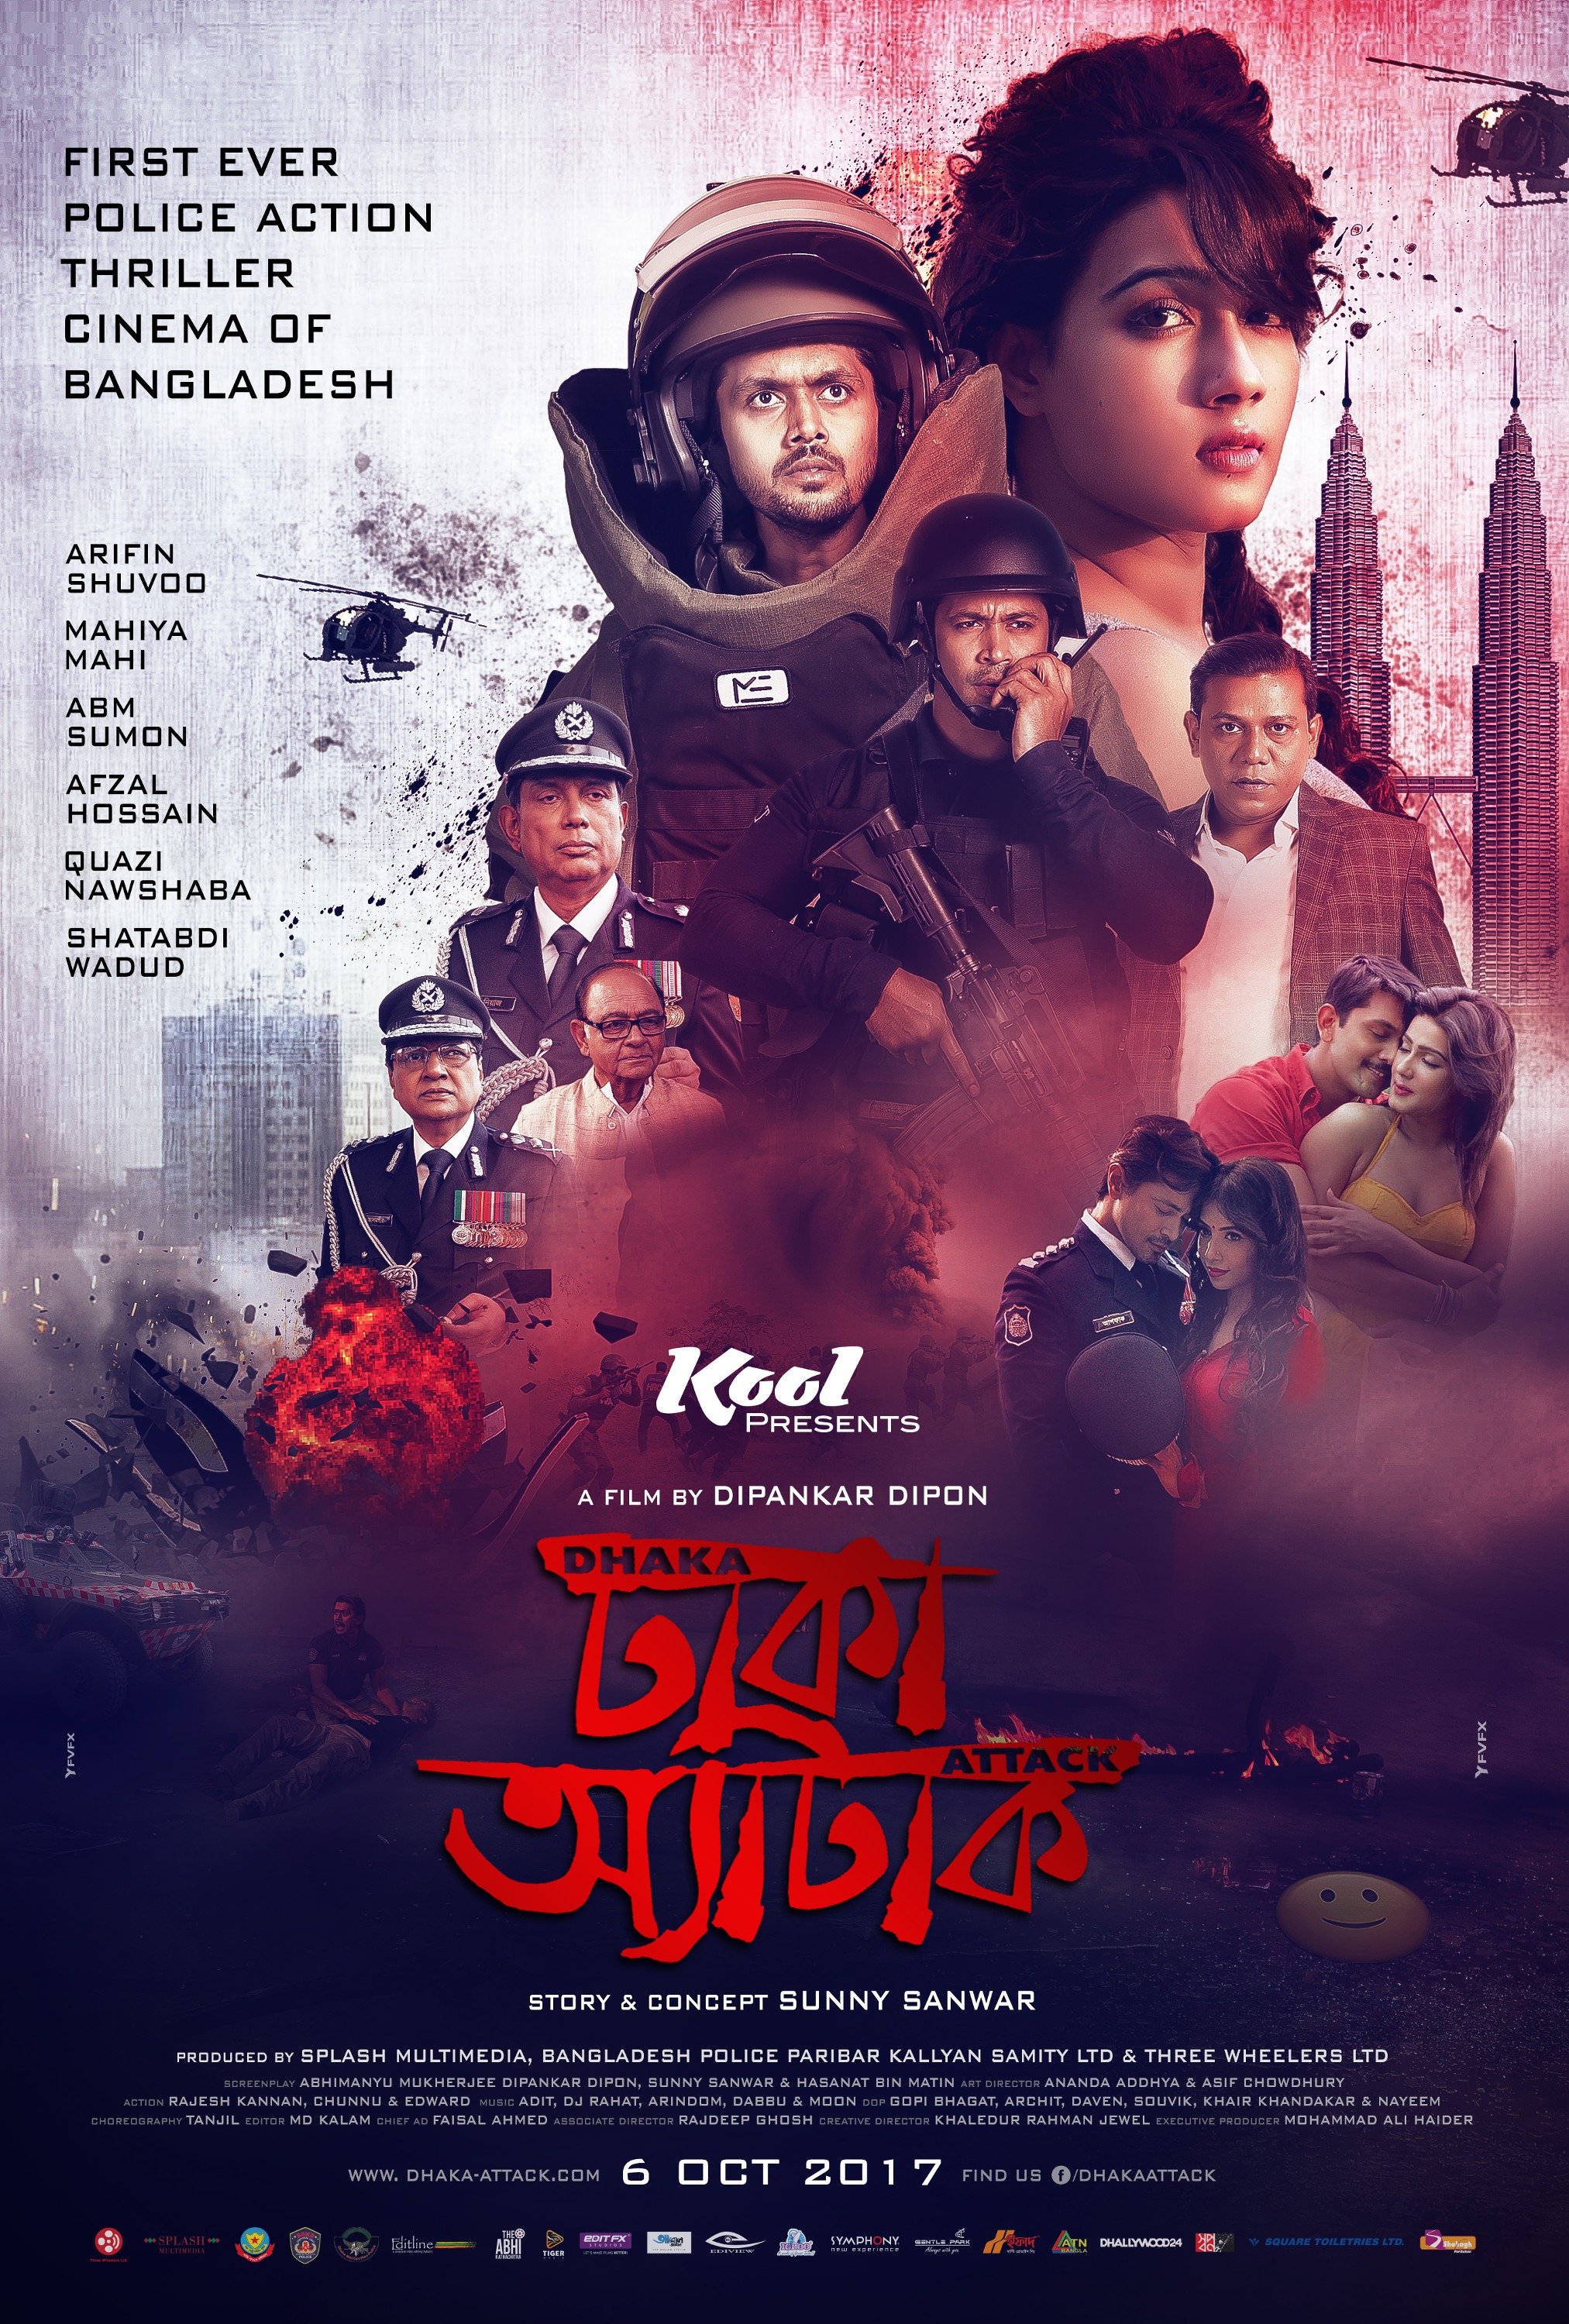 Mega Sized Movie Poster Image for Dhaka Attack (#2 of 10)